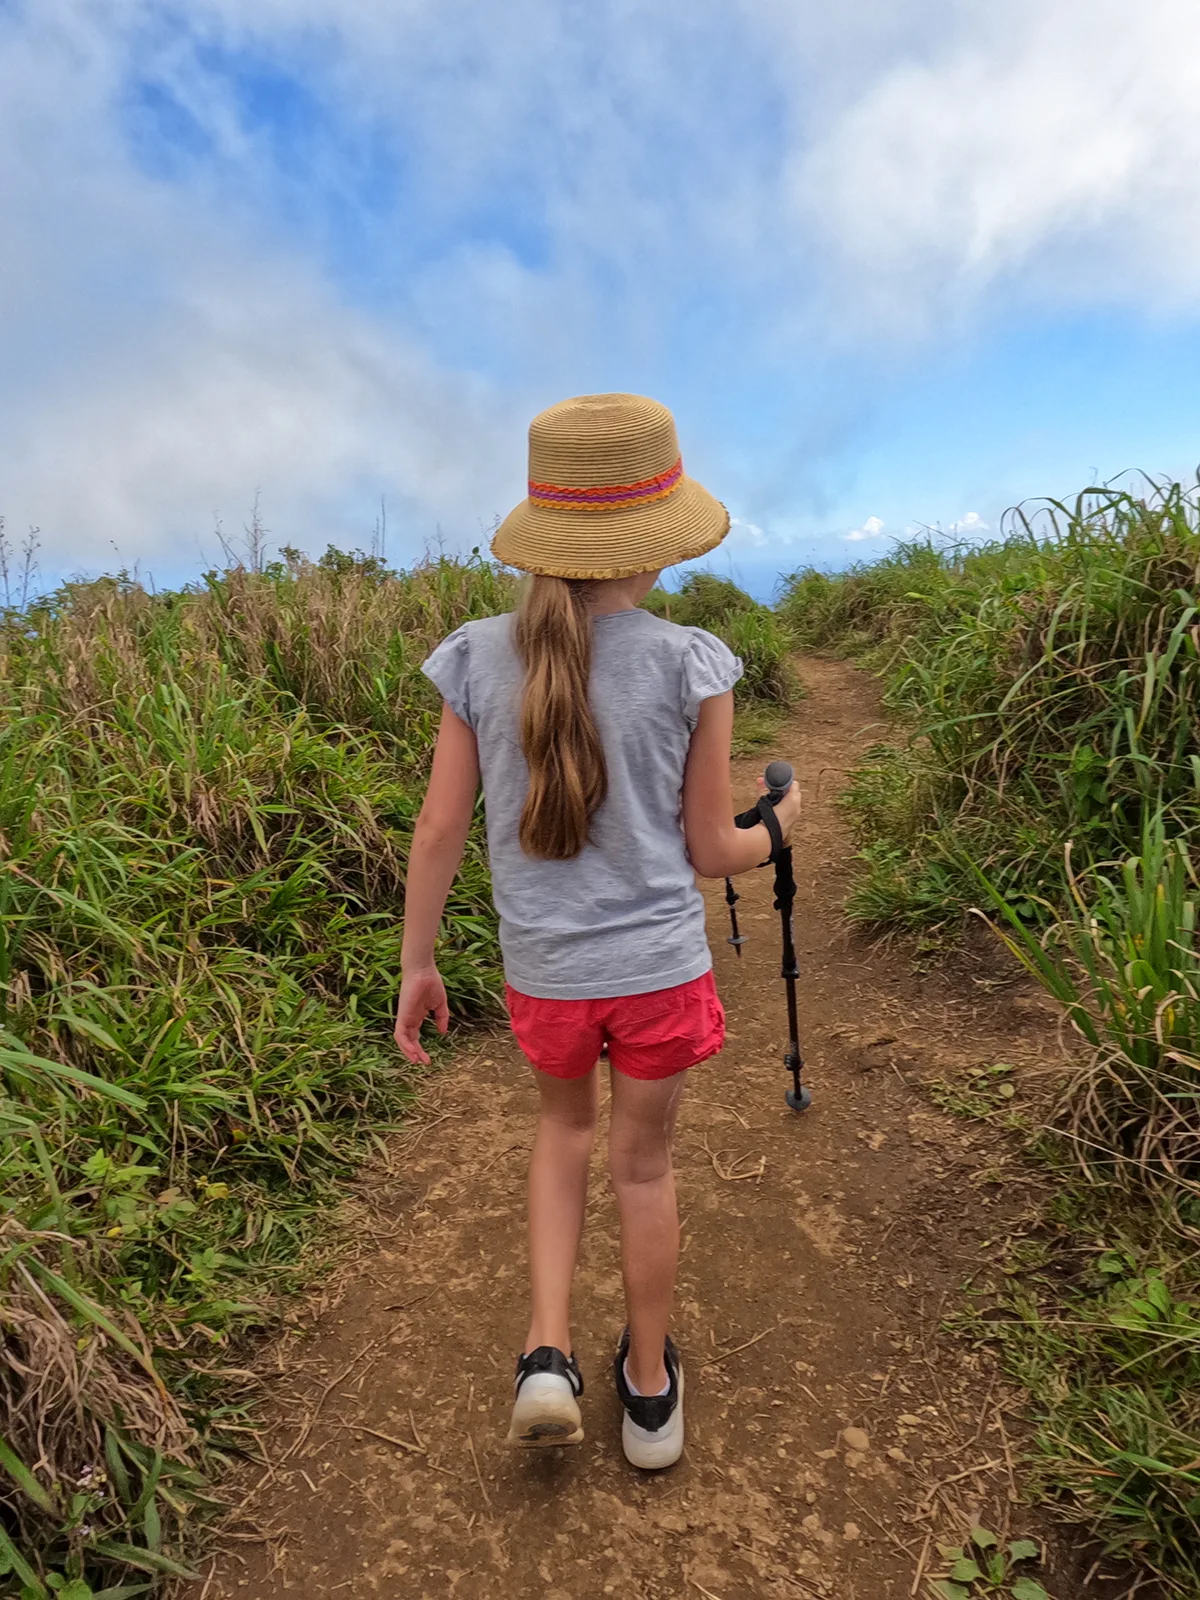 things to do in maui for kids hiking trail girl with long ponytail hikes in wavy grass